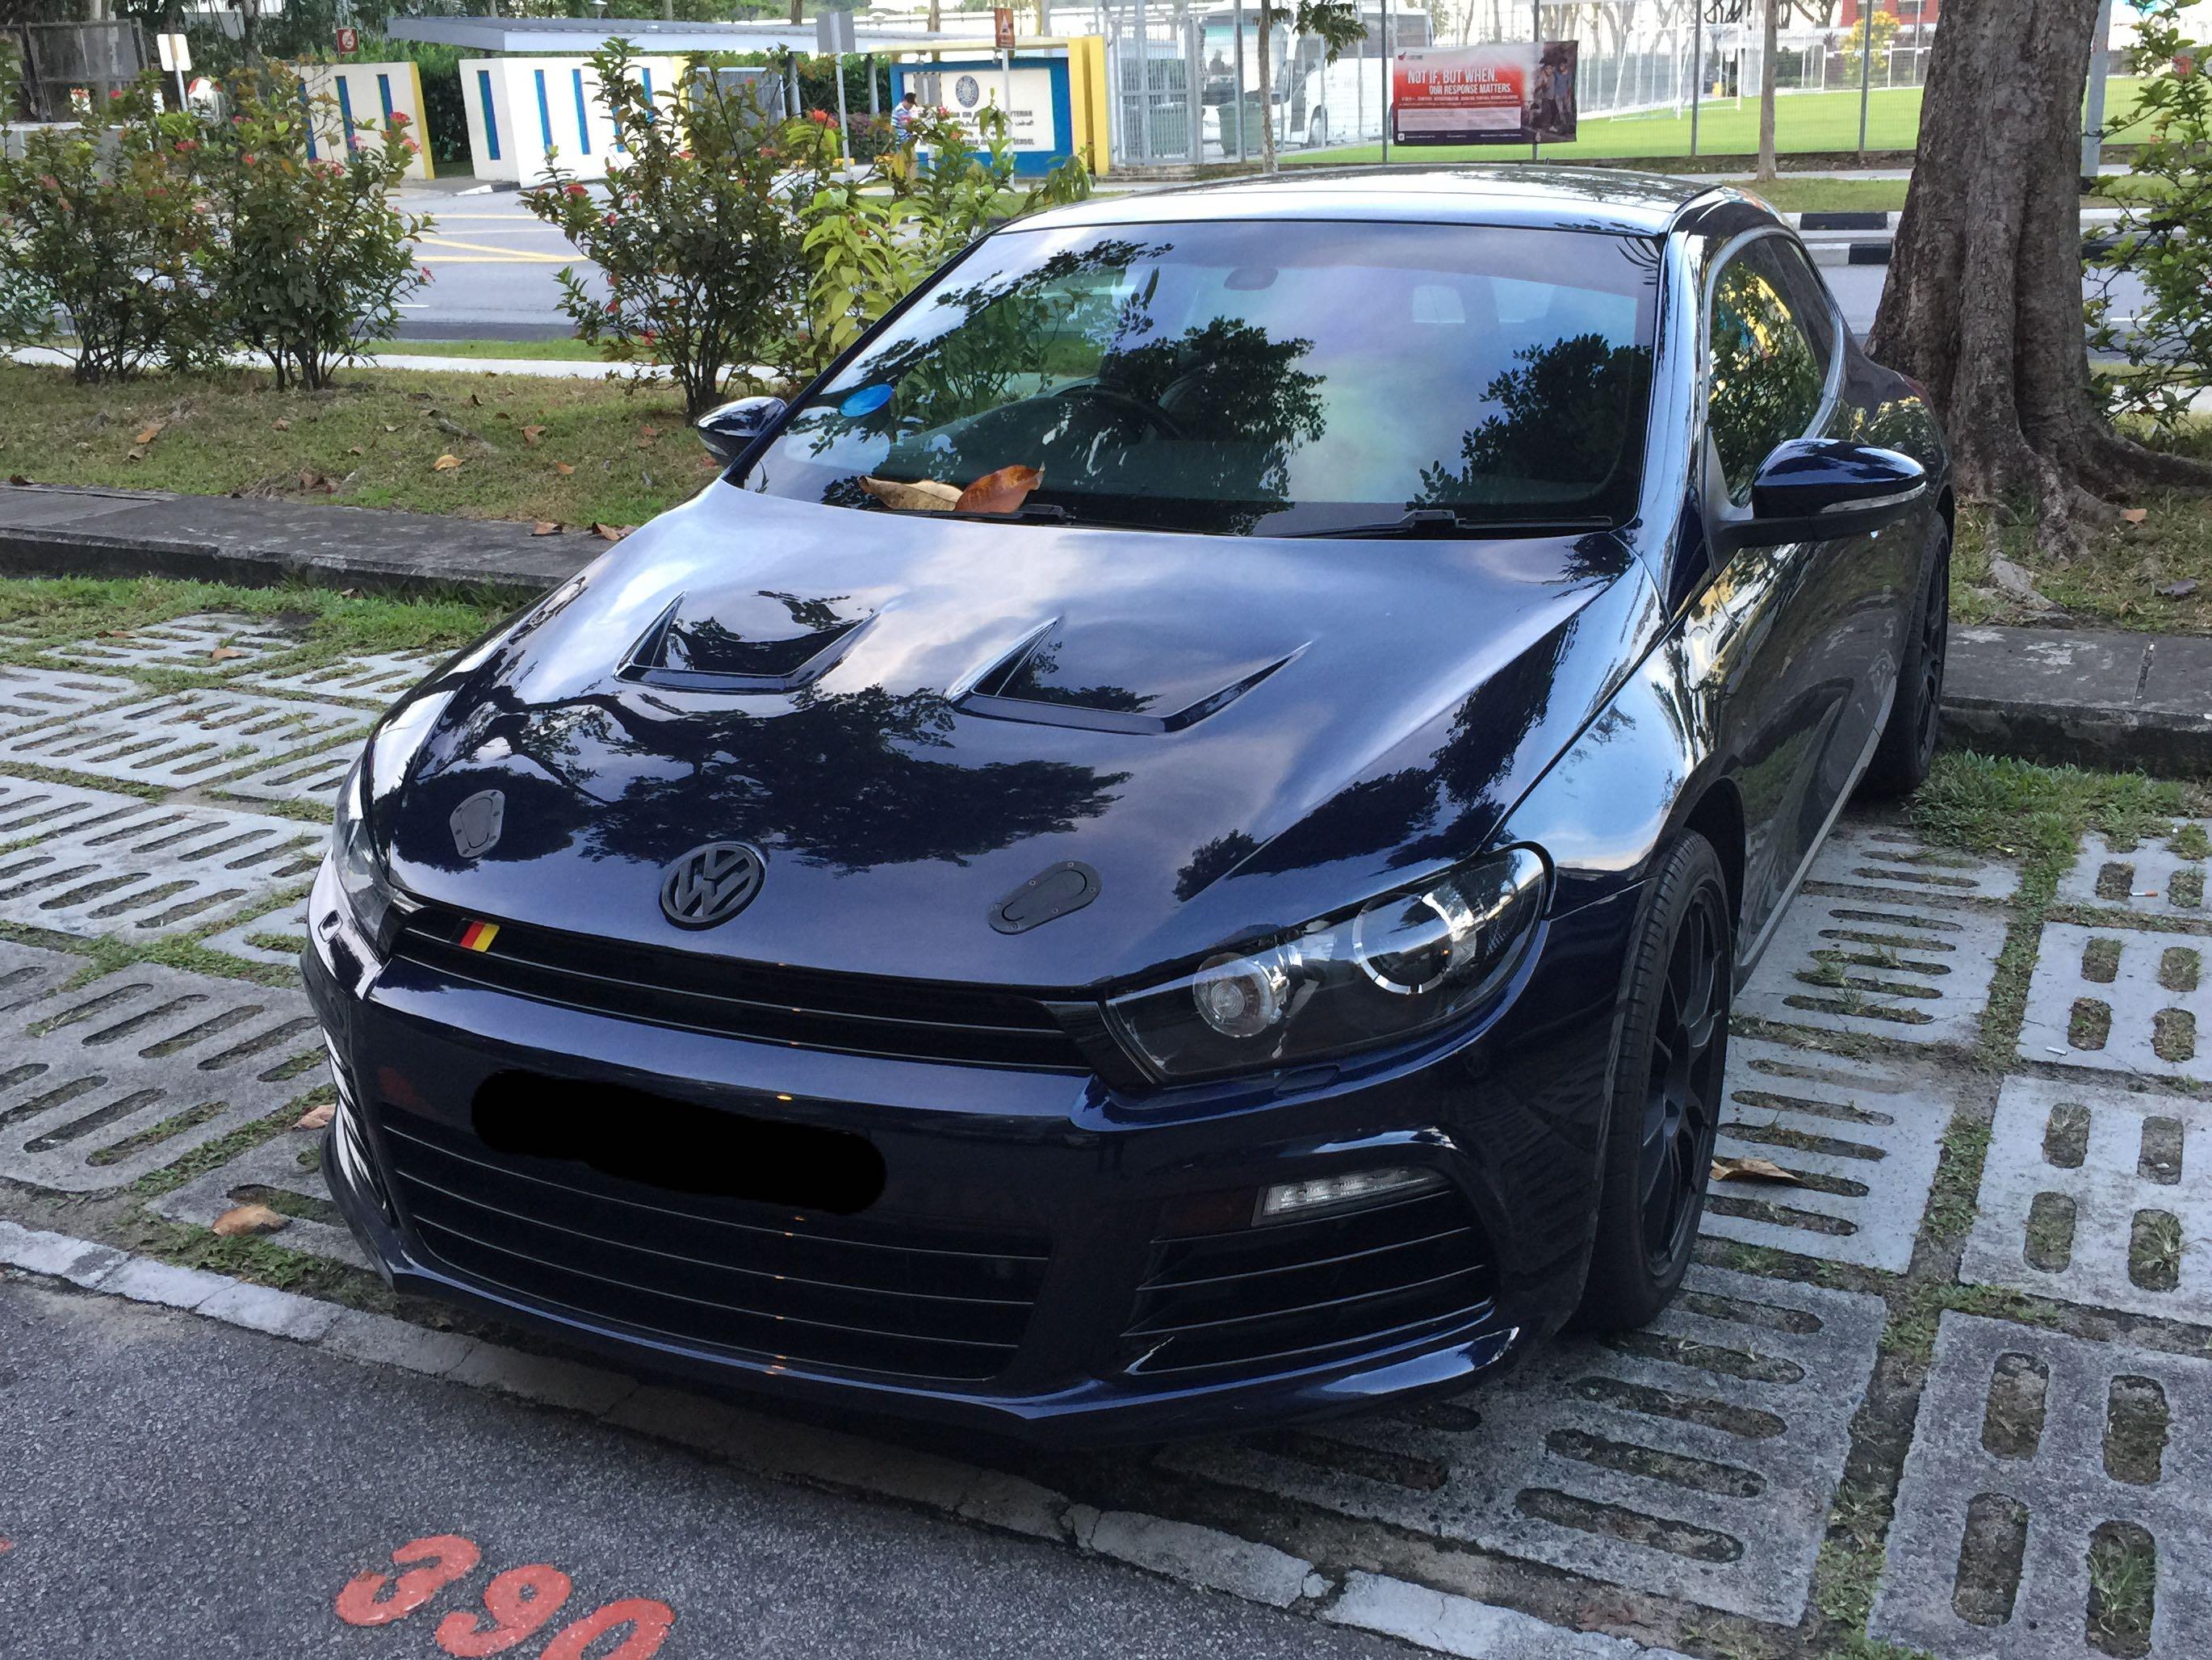 Volkswagen Scirocco 2 0 Tsi Dsg Auto Cars Used Cars On Carousell